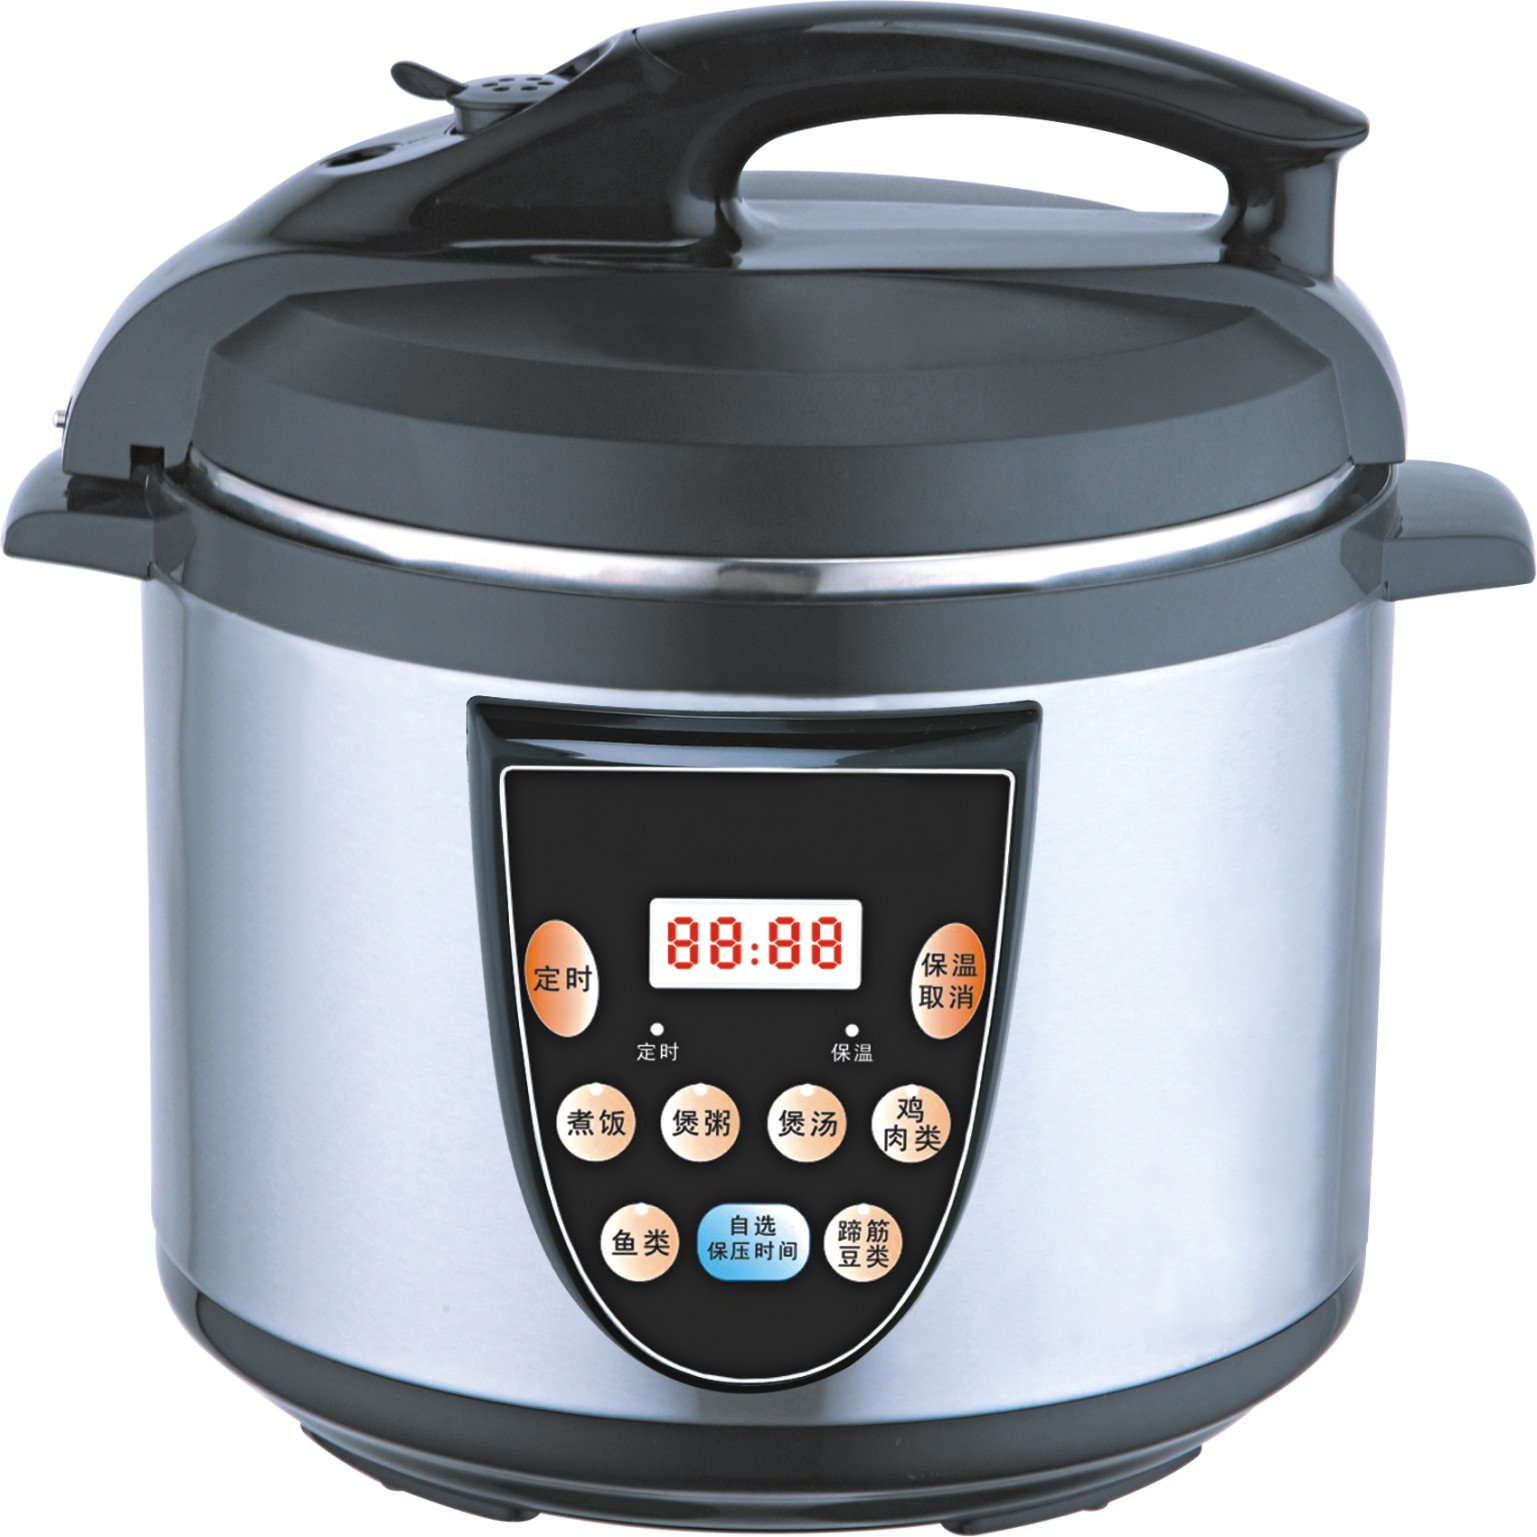 Non stick pot stainless steel microcomputer LED display electric pressure cooker